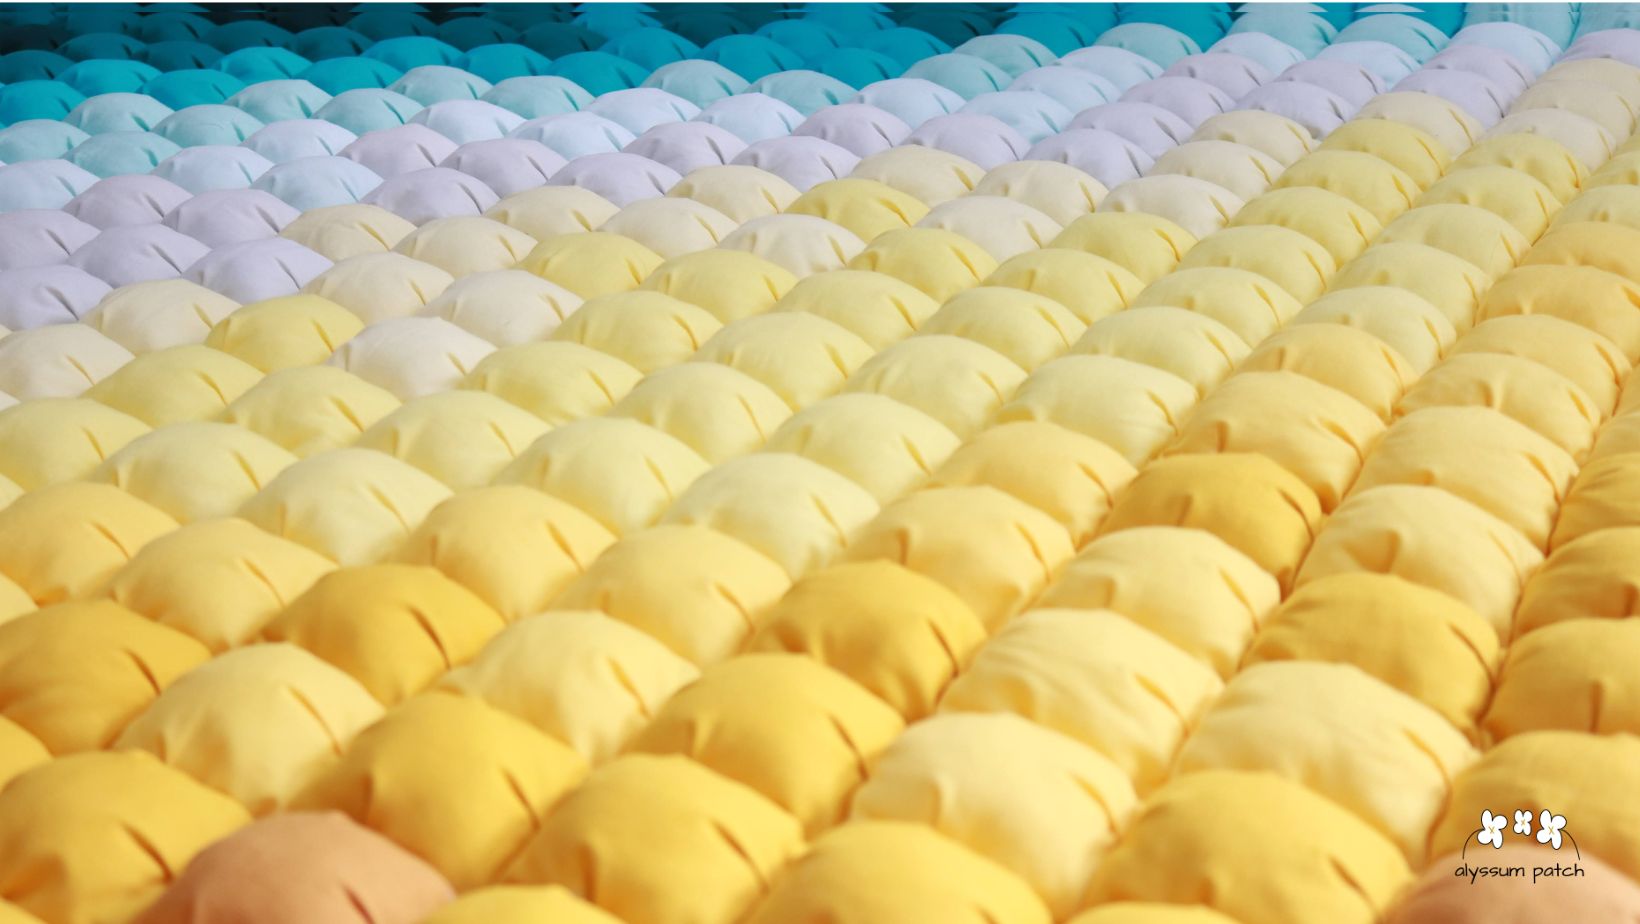 A close-up view of the Seaside Puff Blanket 